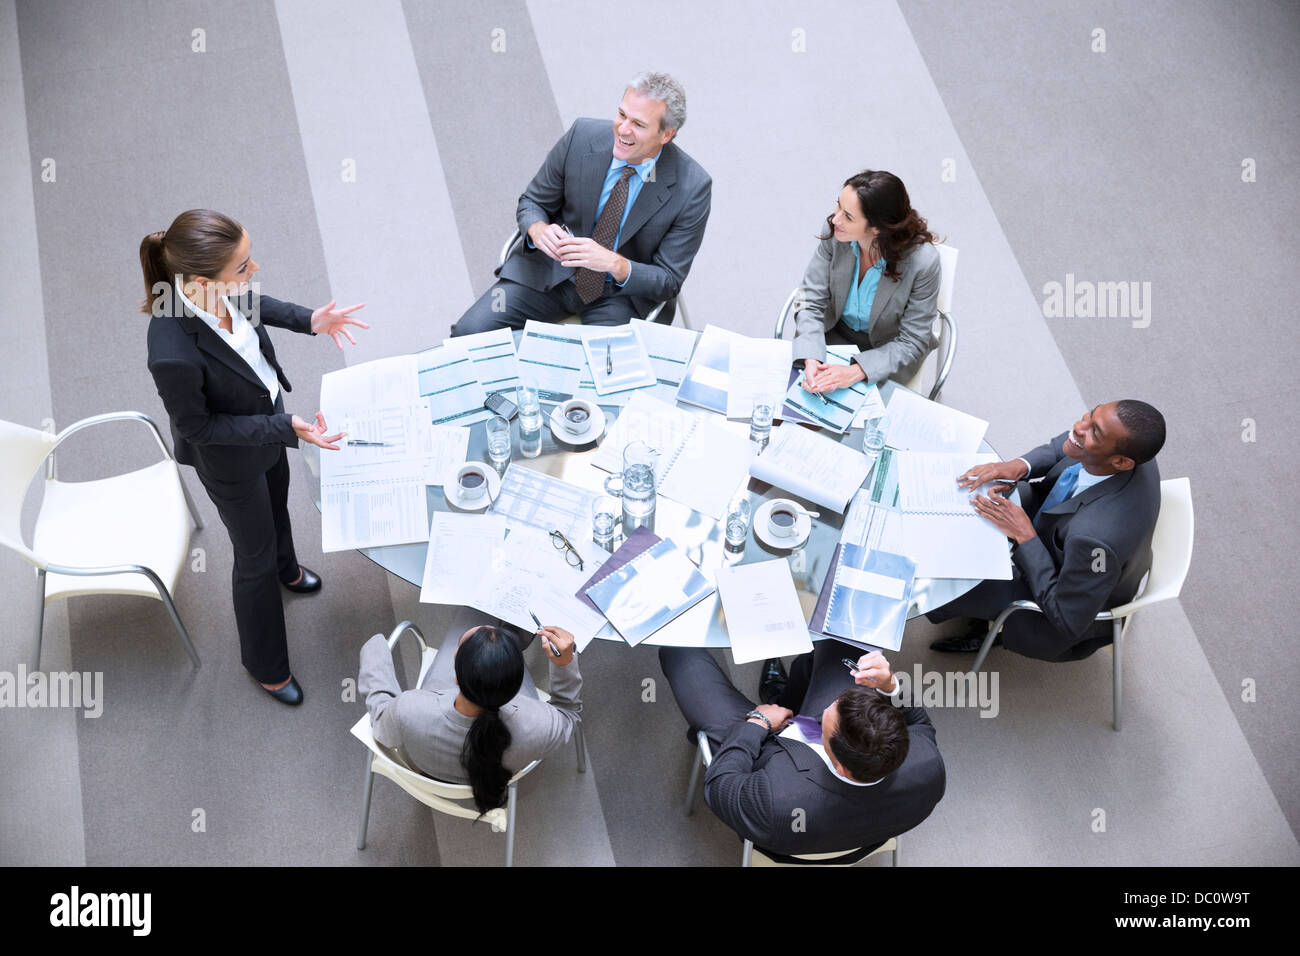 High angle view of gesturing businesswoman leading meeting Stock Photo